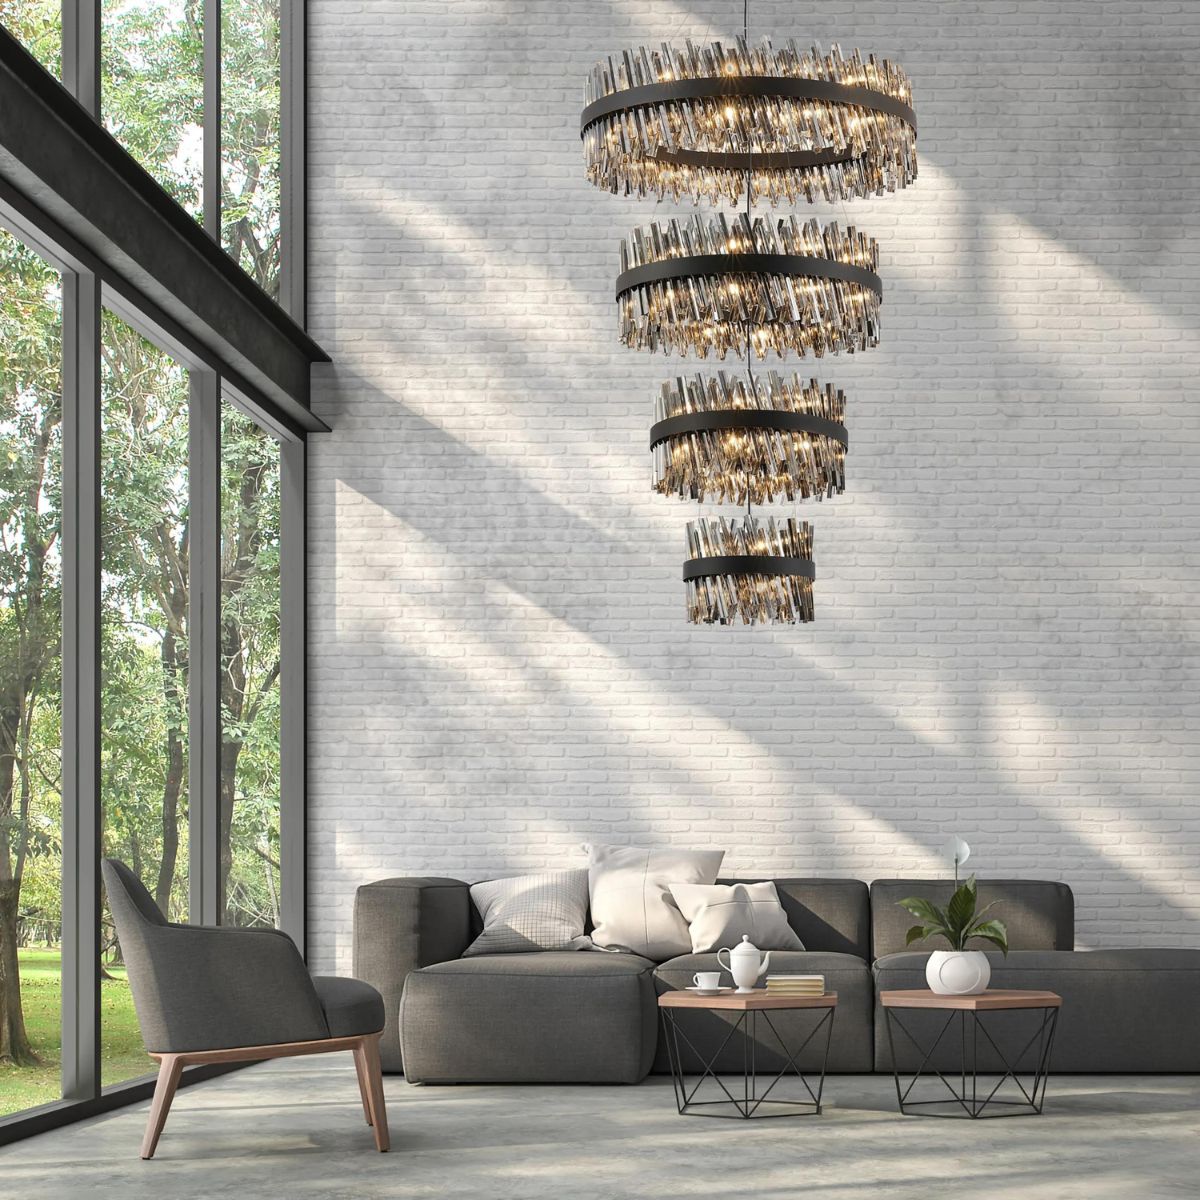 Which Chandelier Ceiling Lighting is Best Suited for Your Home?